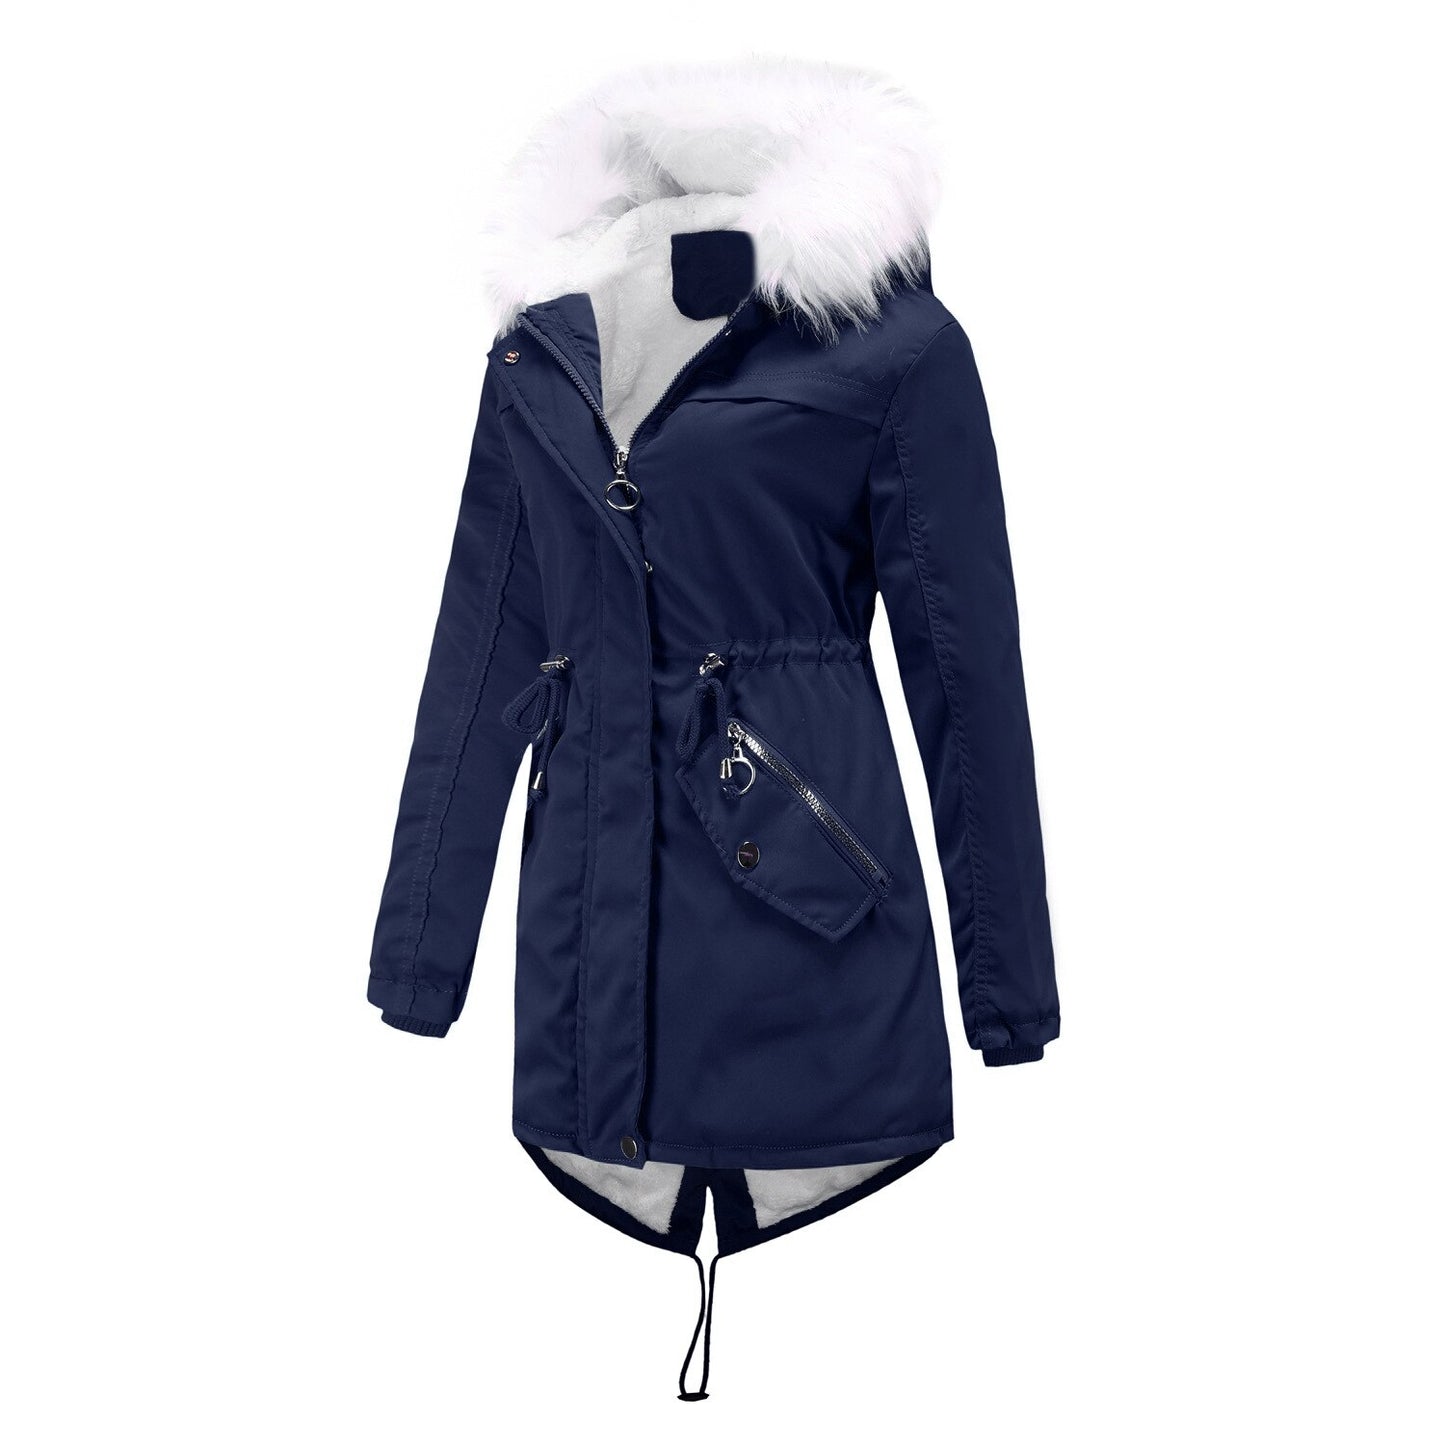 Pai Overcome Women's Mid-length Plus Fleece Cotton-padded Jacket Women's Warmth with Fur Collar Loose Winter Jacket - Plushlegacy